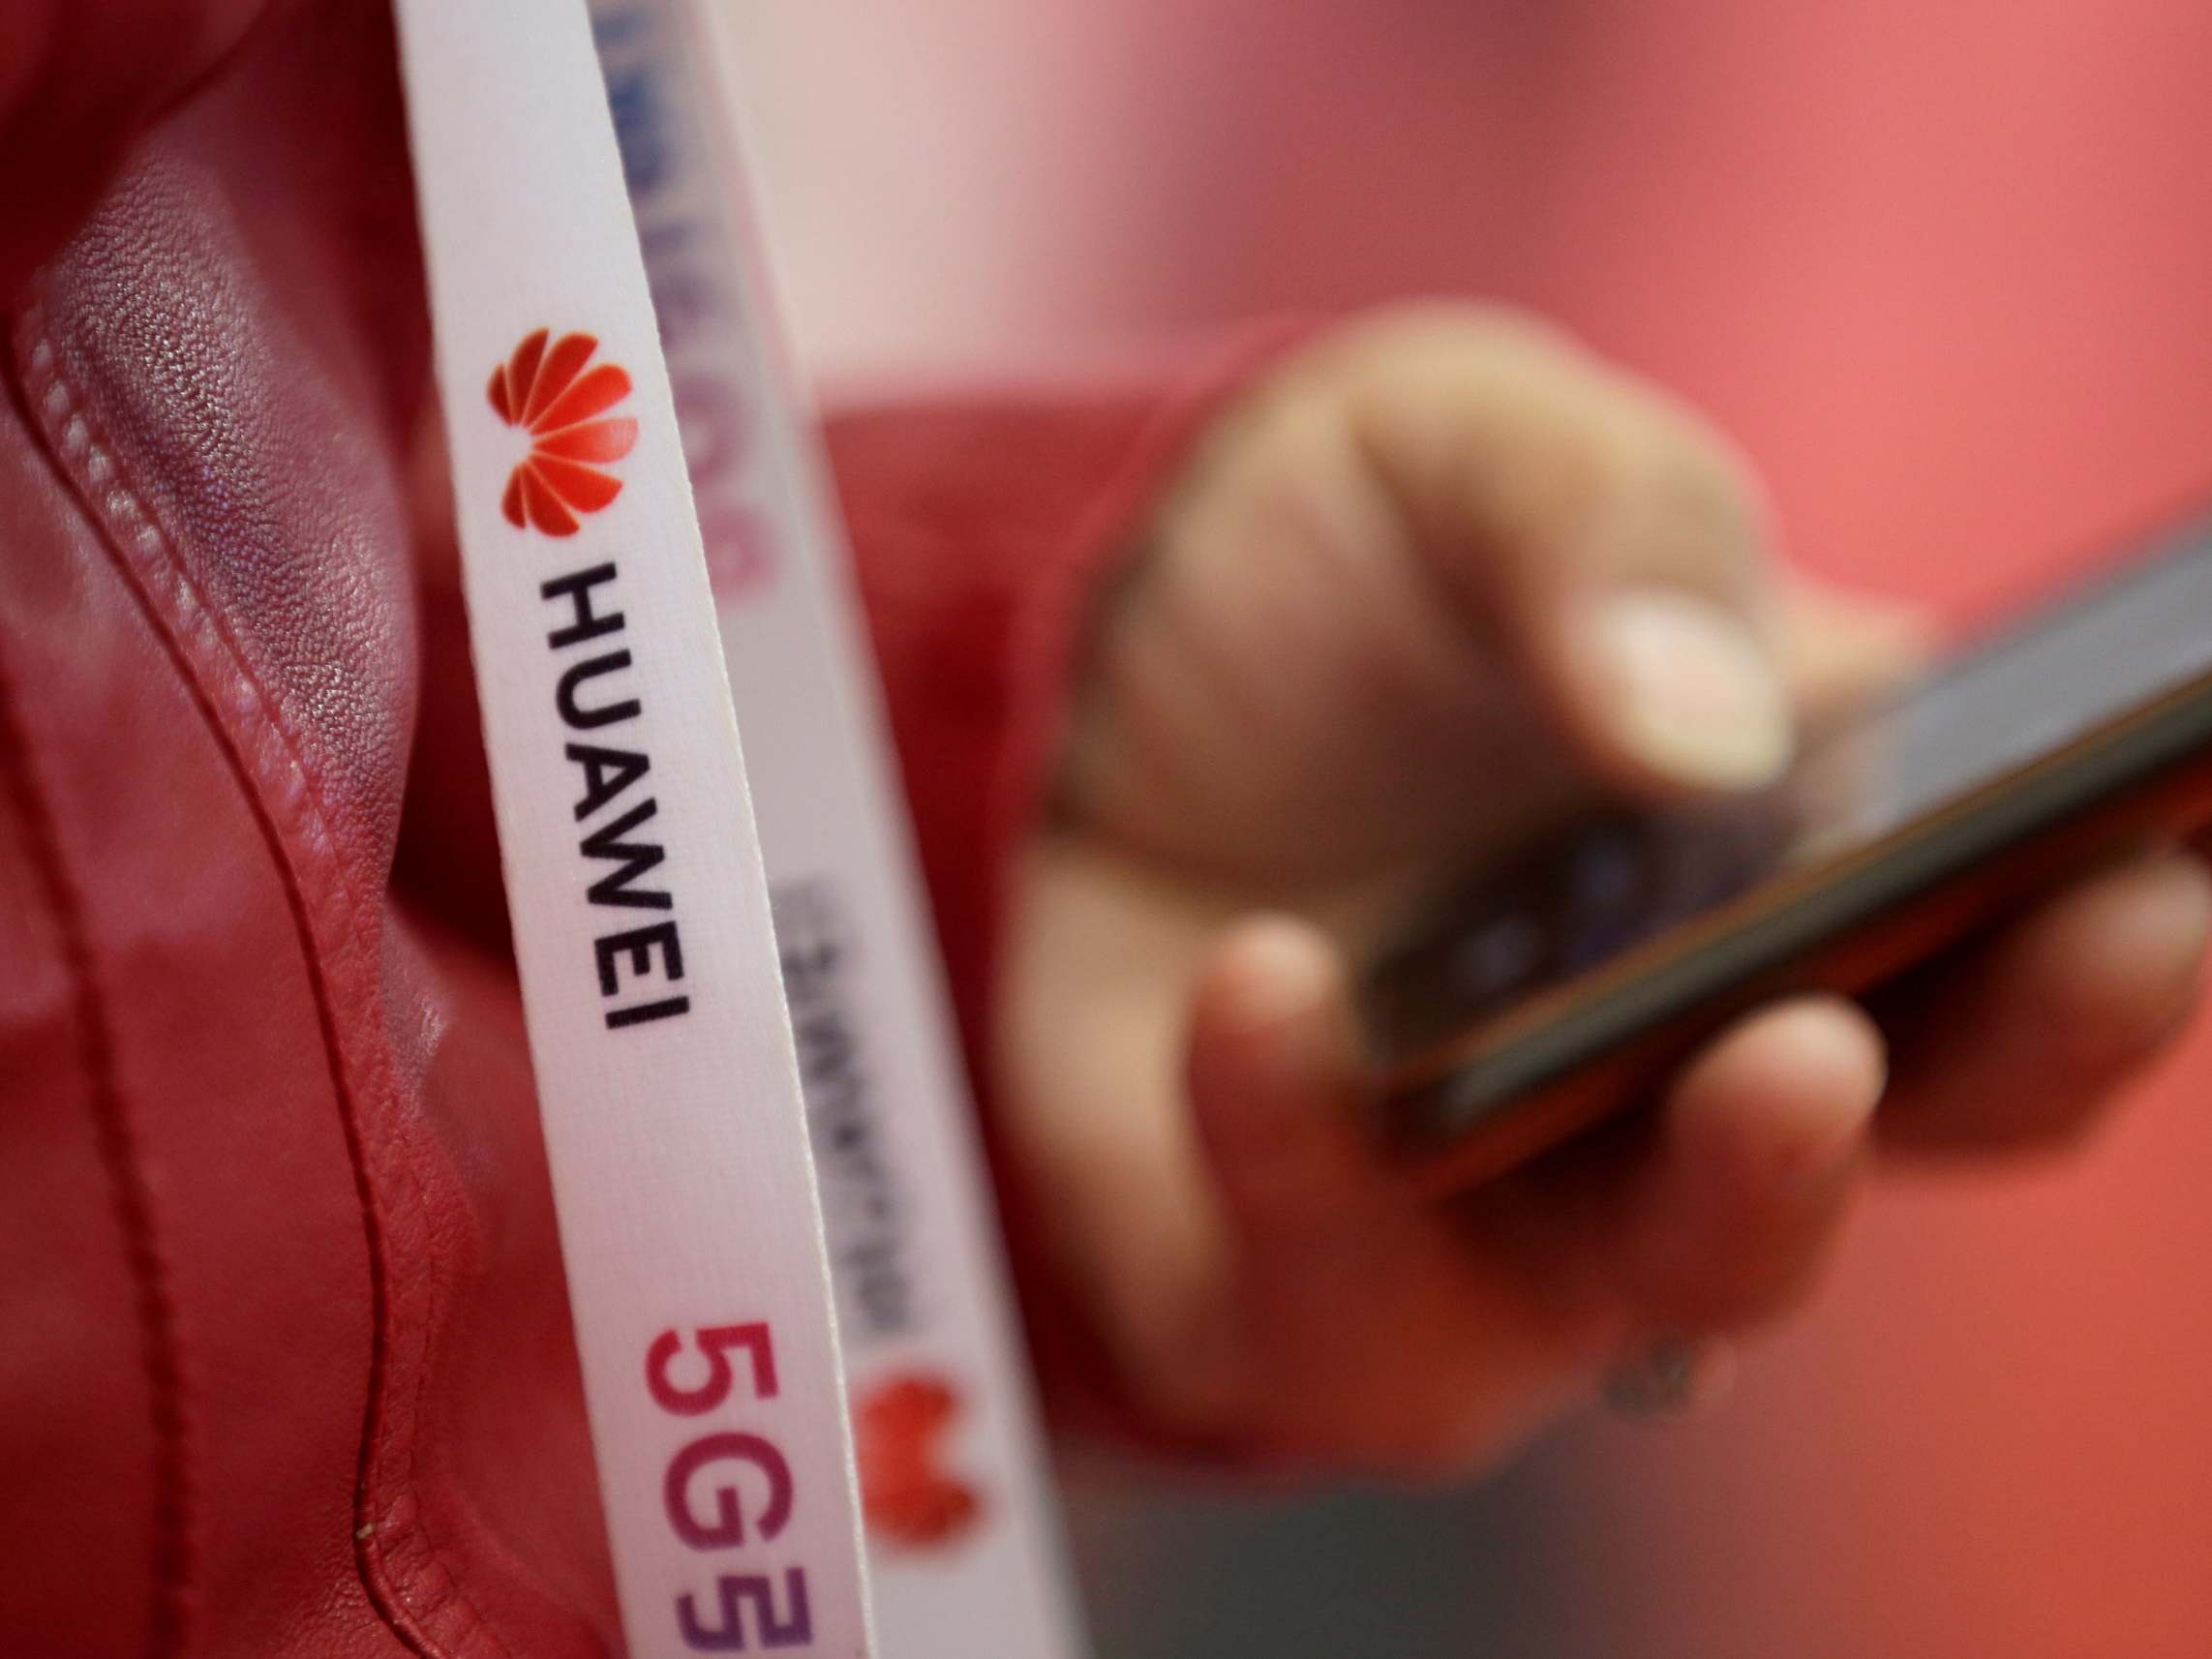 Huawei is in talks about a role in building the UK’s 5G network